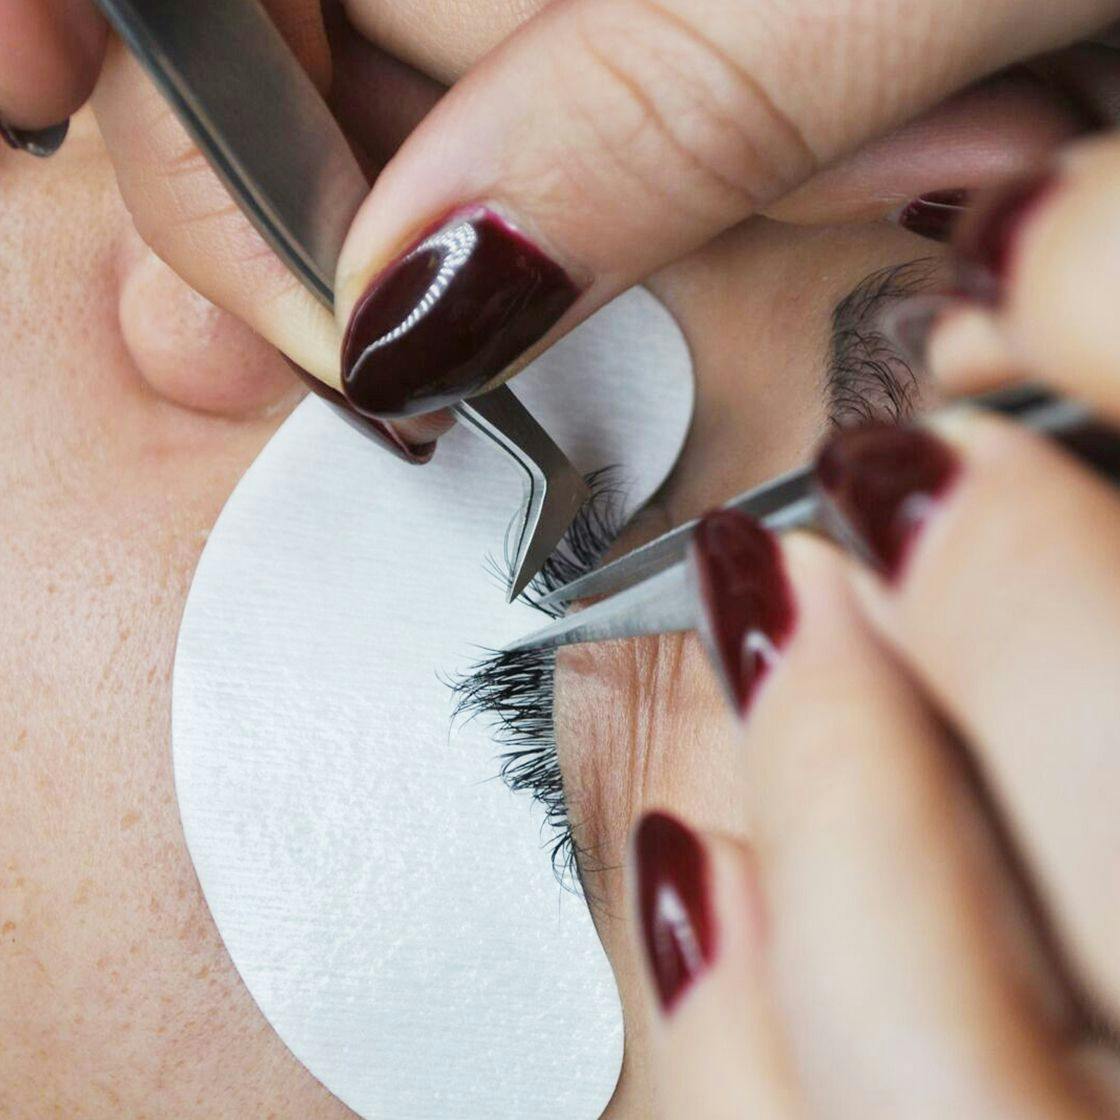 Eyelash extensions: how long do they last and which one is best?